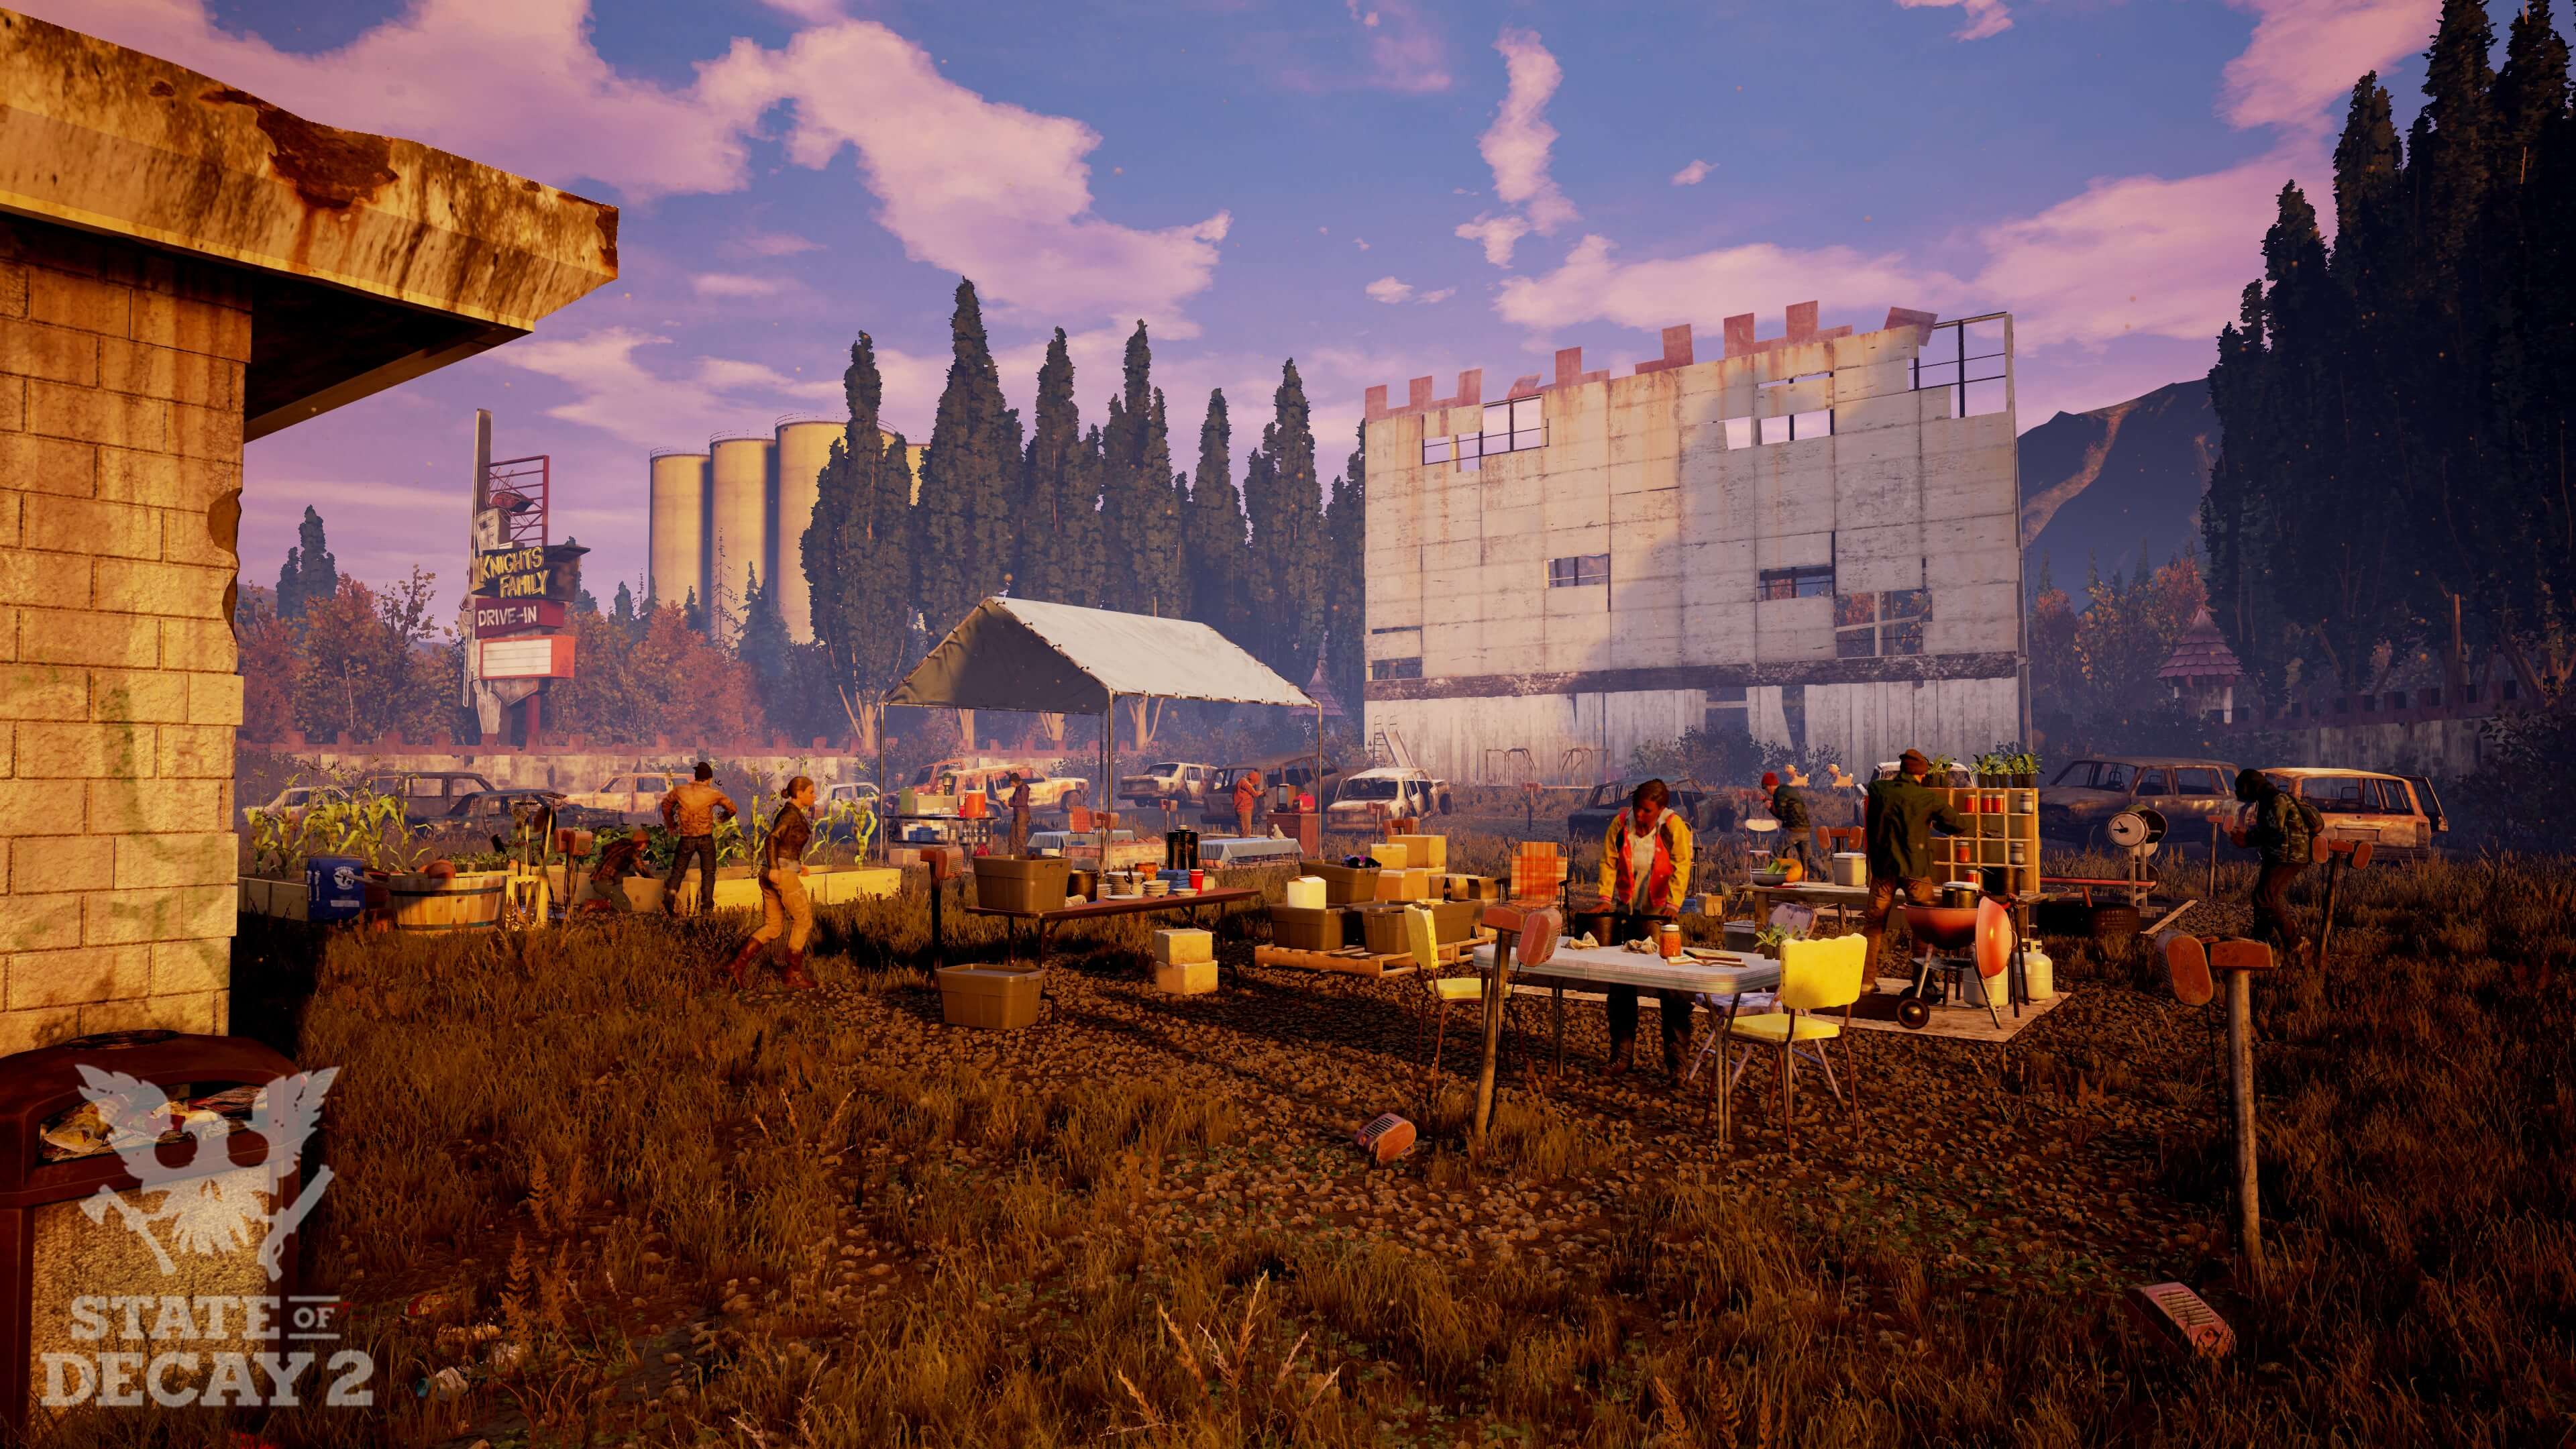 state of decay setting gameplay release date 4 min 1  2